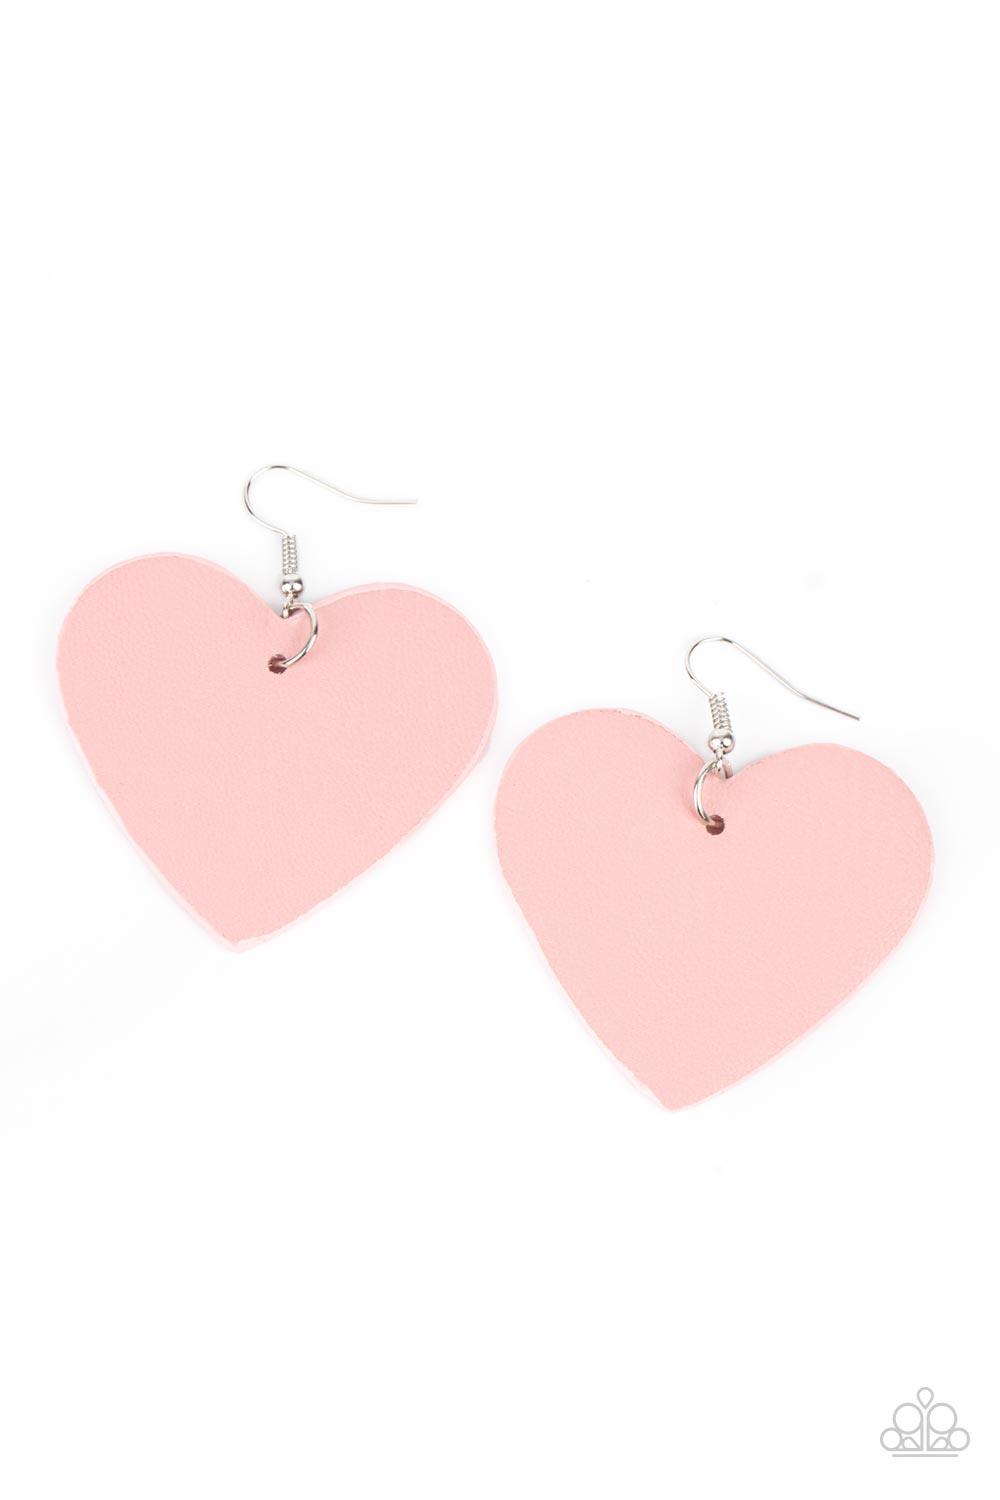 Paparazzi Accessories Country Crush - Pink A pink leather heart frame swings from the ear for a flirtatious pop of color. Earring attaches to a standard fishhook fitting. Sold as one pair of earrings. Earrings